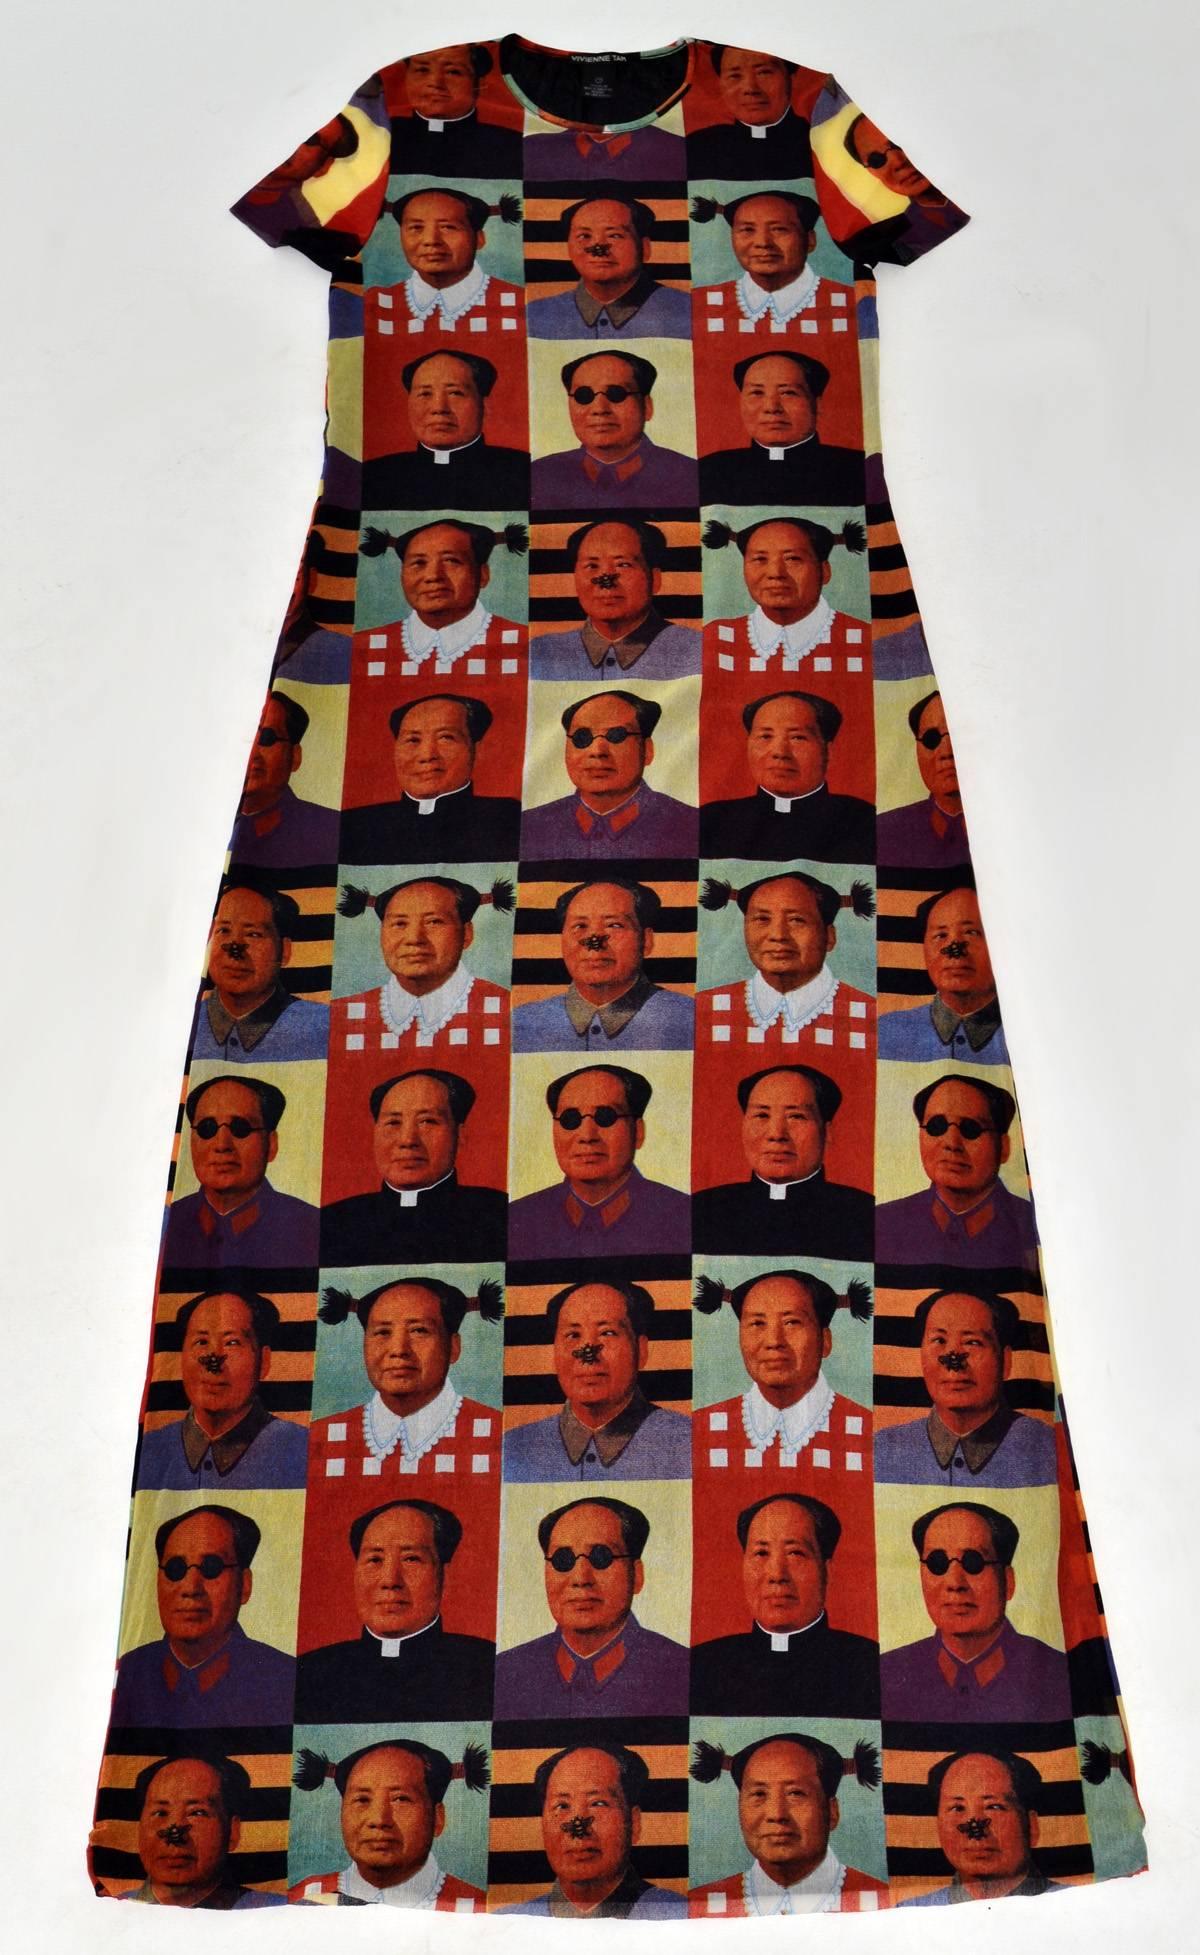 Rare and modern Vivienne Tam 'Mao' women's dress in size 3 (large). Full length in printed synthetic material covered with pop art-like images of Chairman Mao. Labeled. As seen in 'China Chic' by Vivienne Tam.